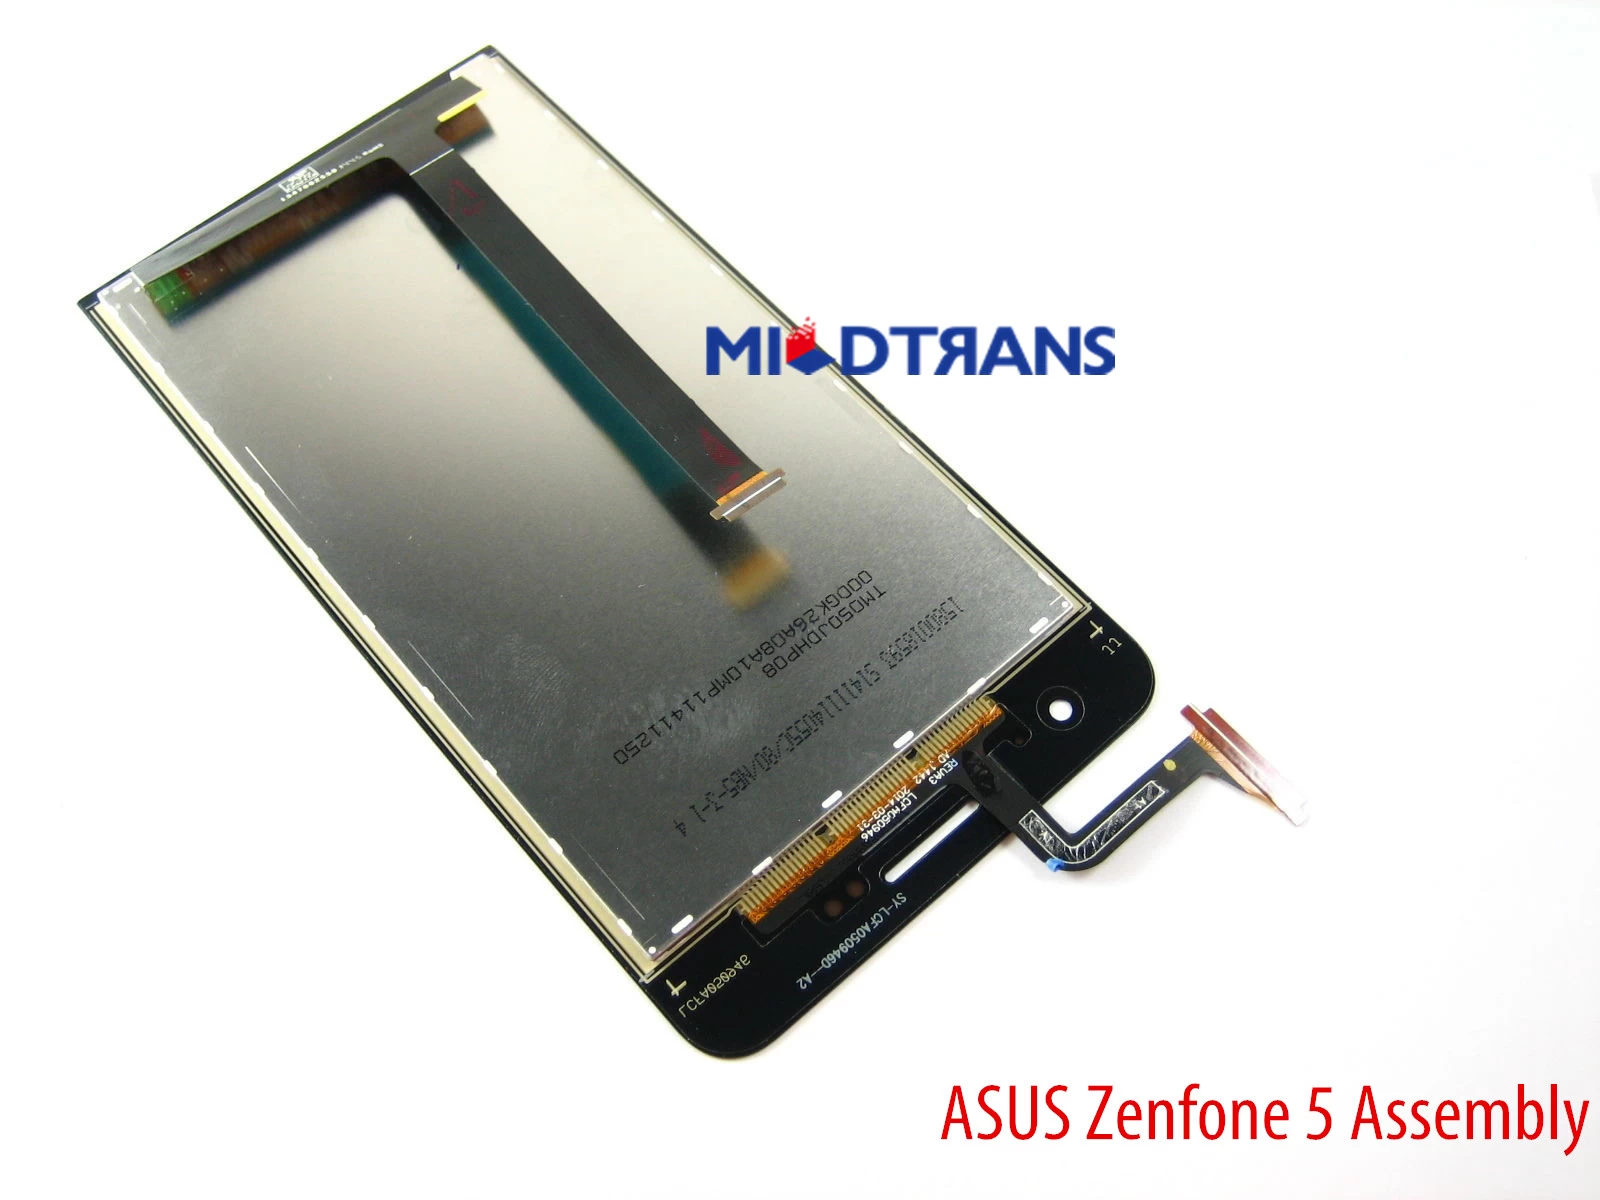 ASUS Zenfone 5 assembly